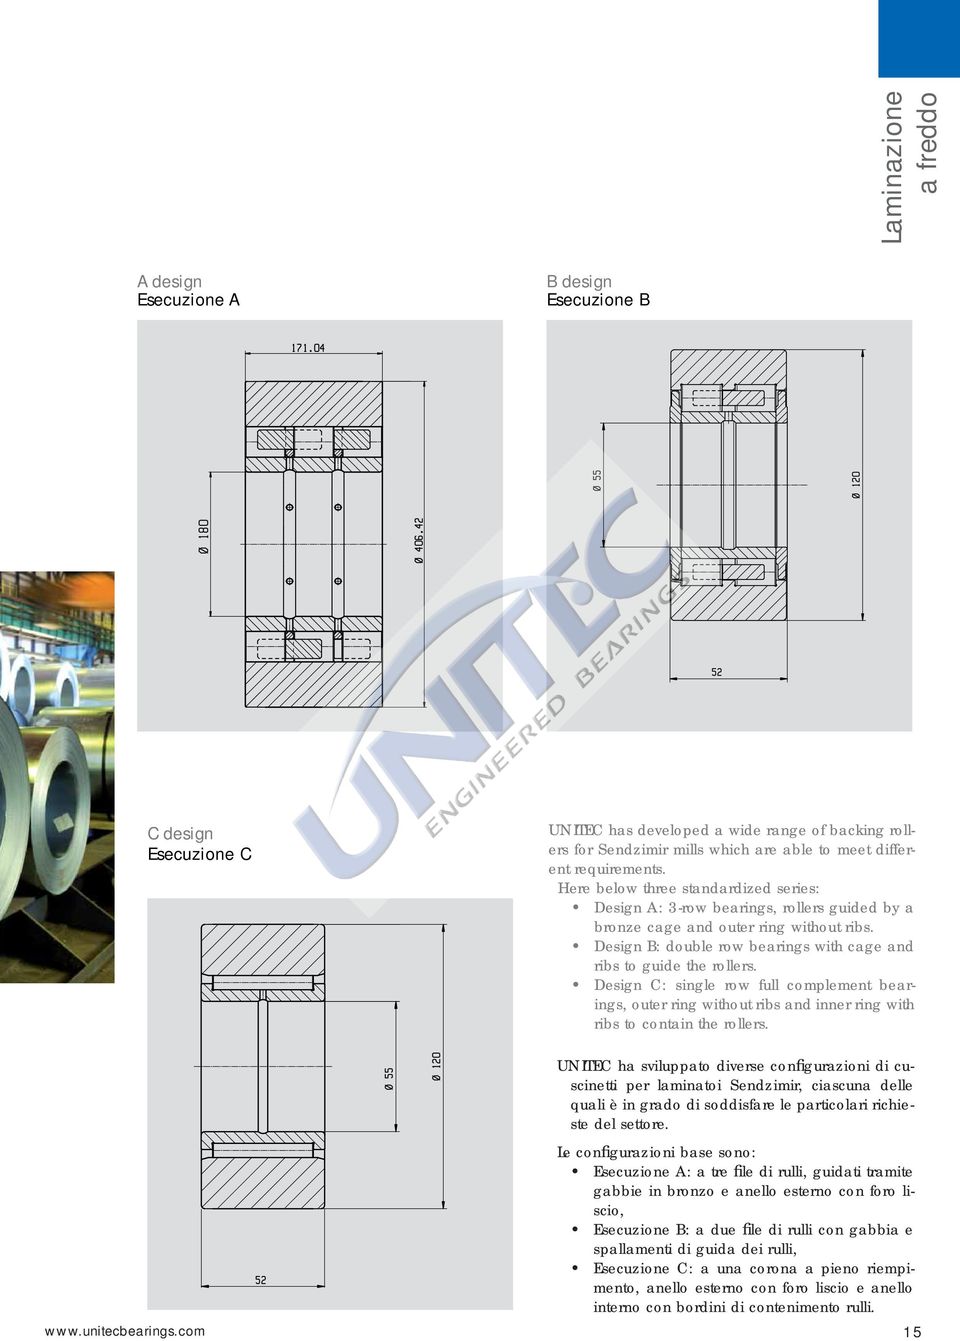 Design B: double row bearings with cage and ribs to guide the rollers. Design C: single row full complement bearings, outer ring without ribs and inner ring with ribs to contain the rollers.